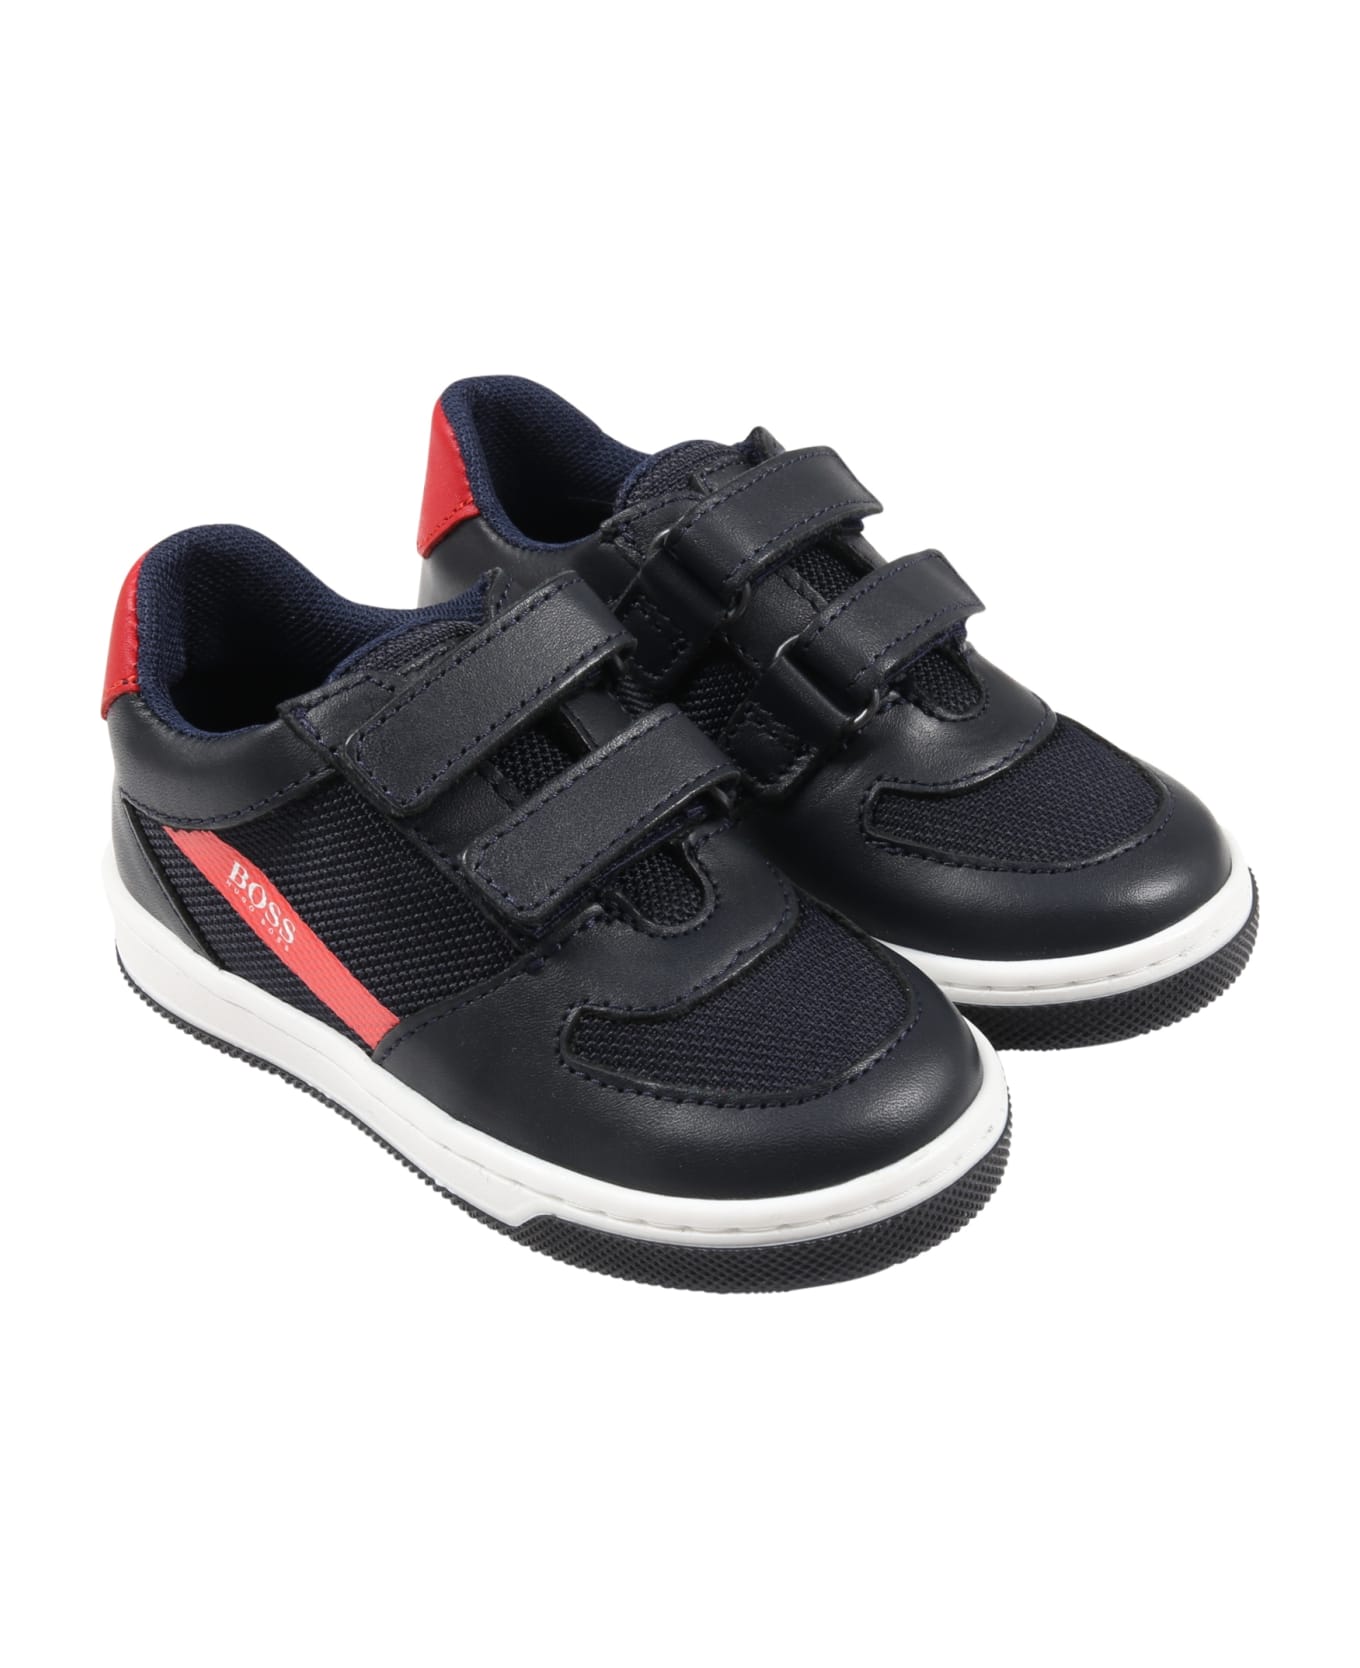 Hugo Boss Black Sneakers For Boy With Red Details - Blue